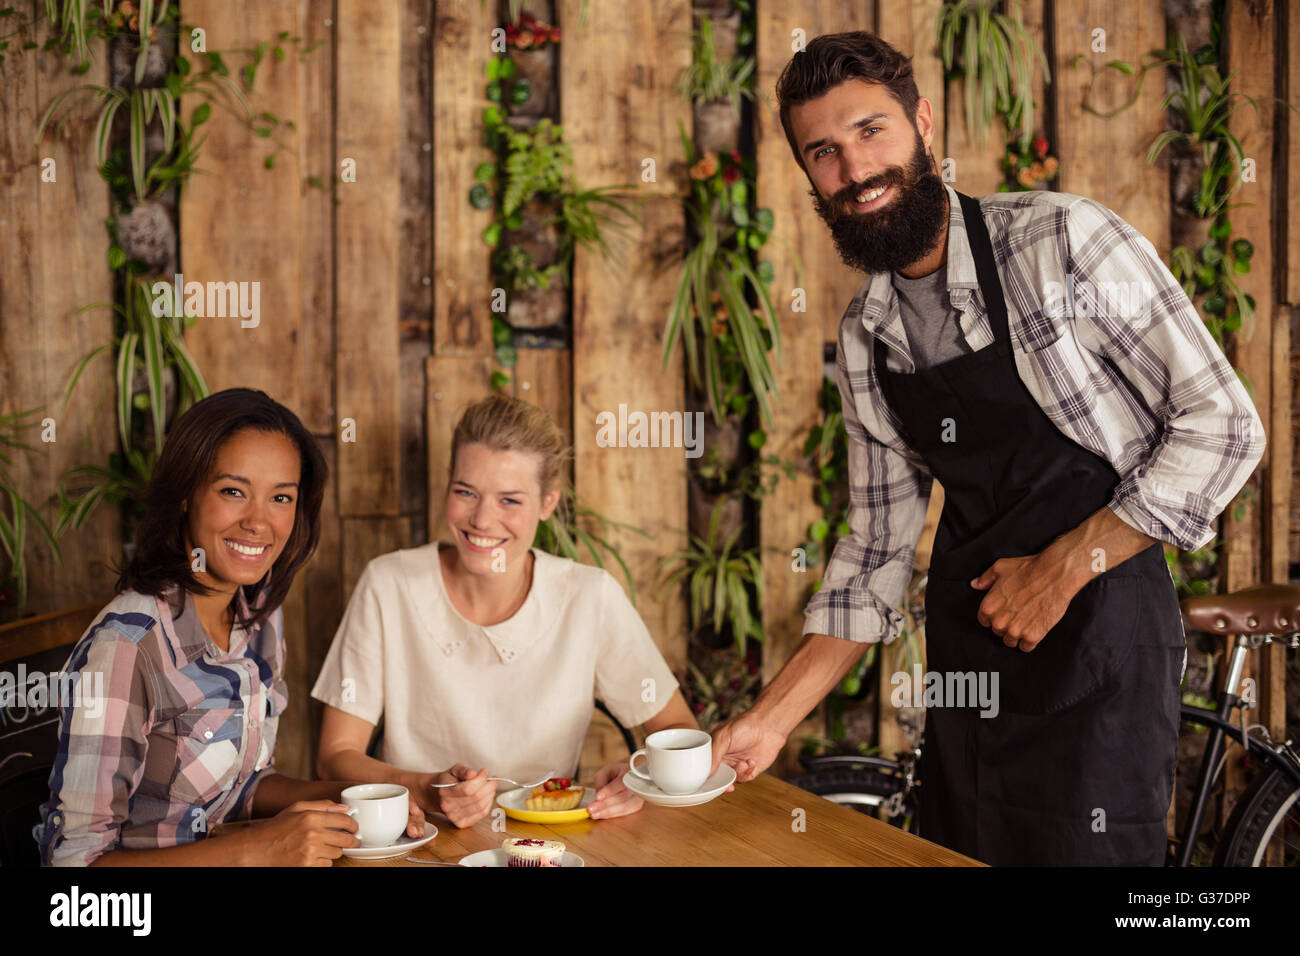 Waiter serving coffees Stock Photo